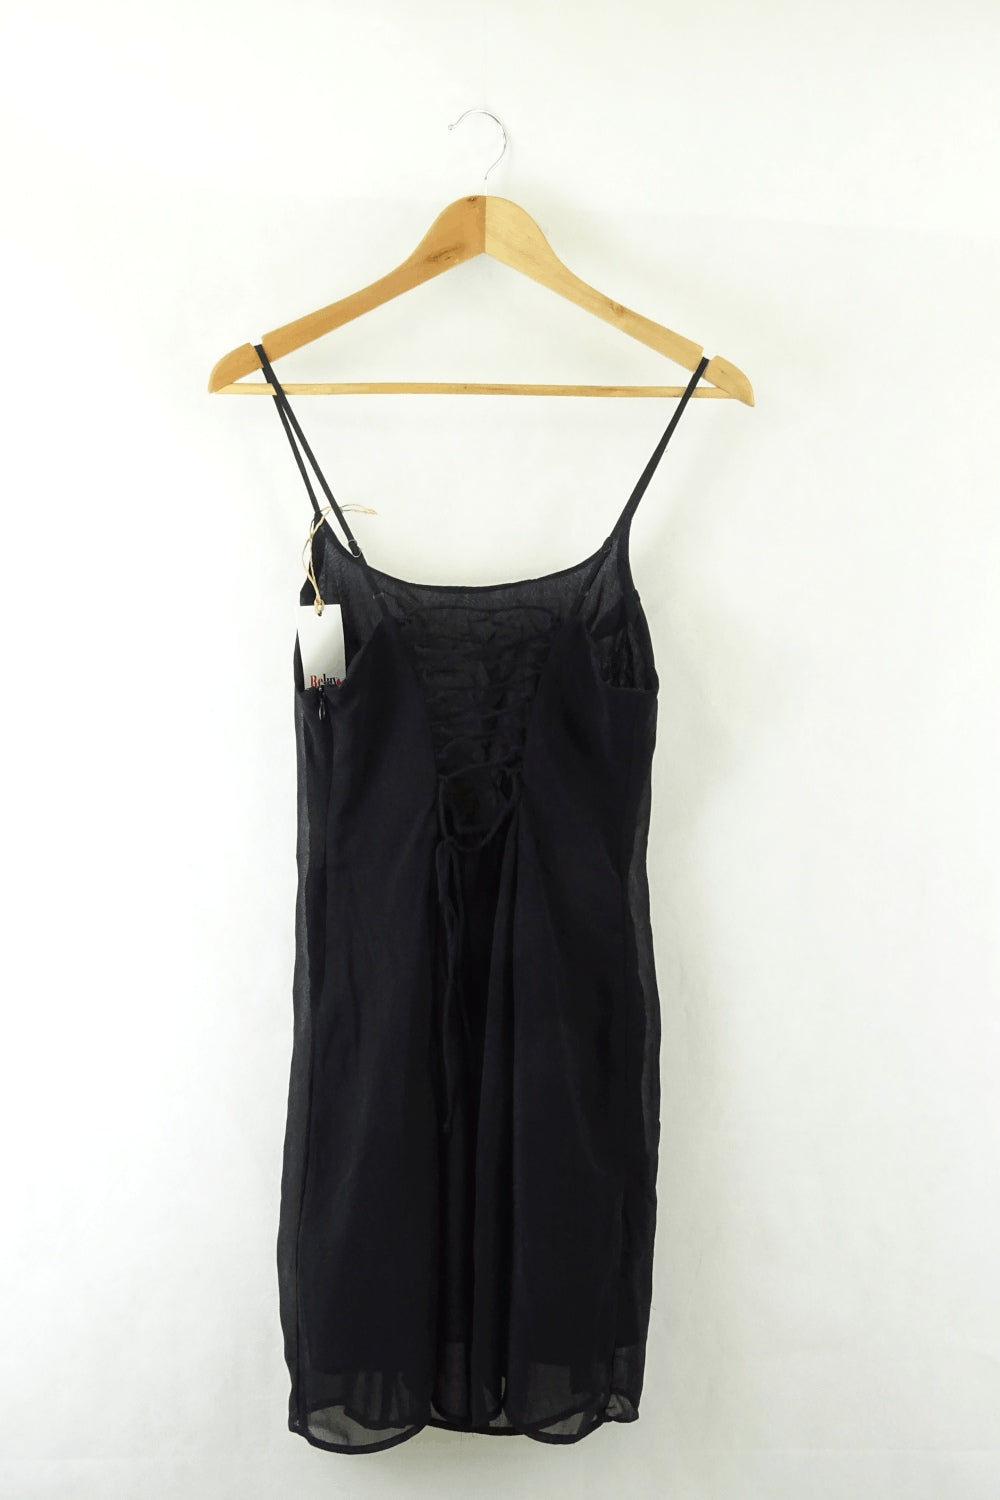 Urban Outfitters Black Strappy Dress 8